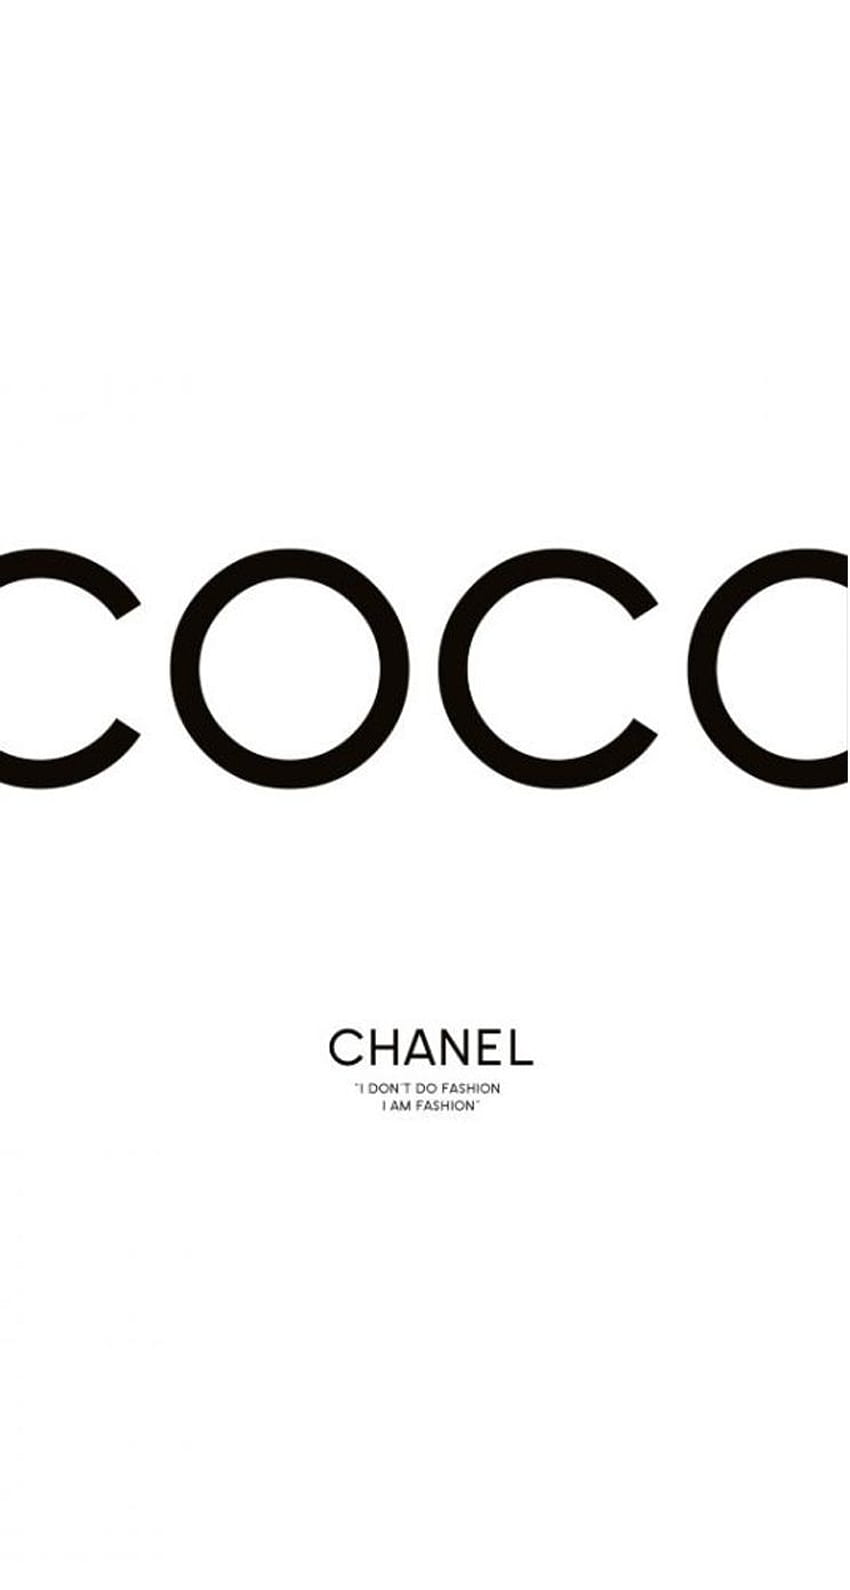 iPhone5 Coco Chanel. Fond d'écran chanel, Affiche, Coco Chanel Quotes wallpaper ponsel HD